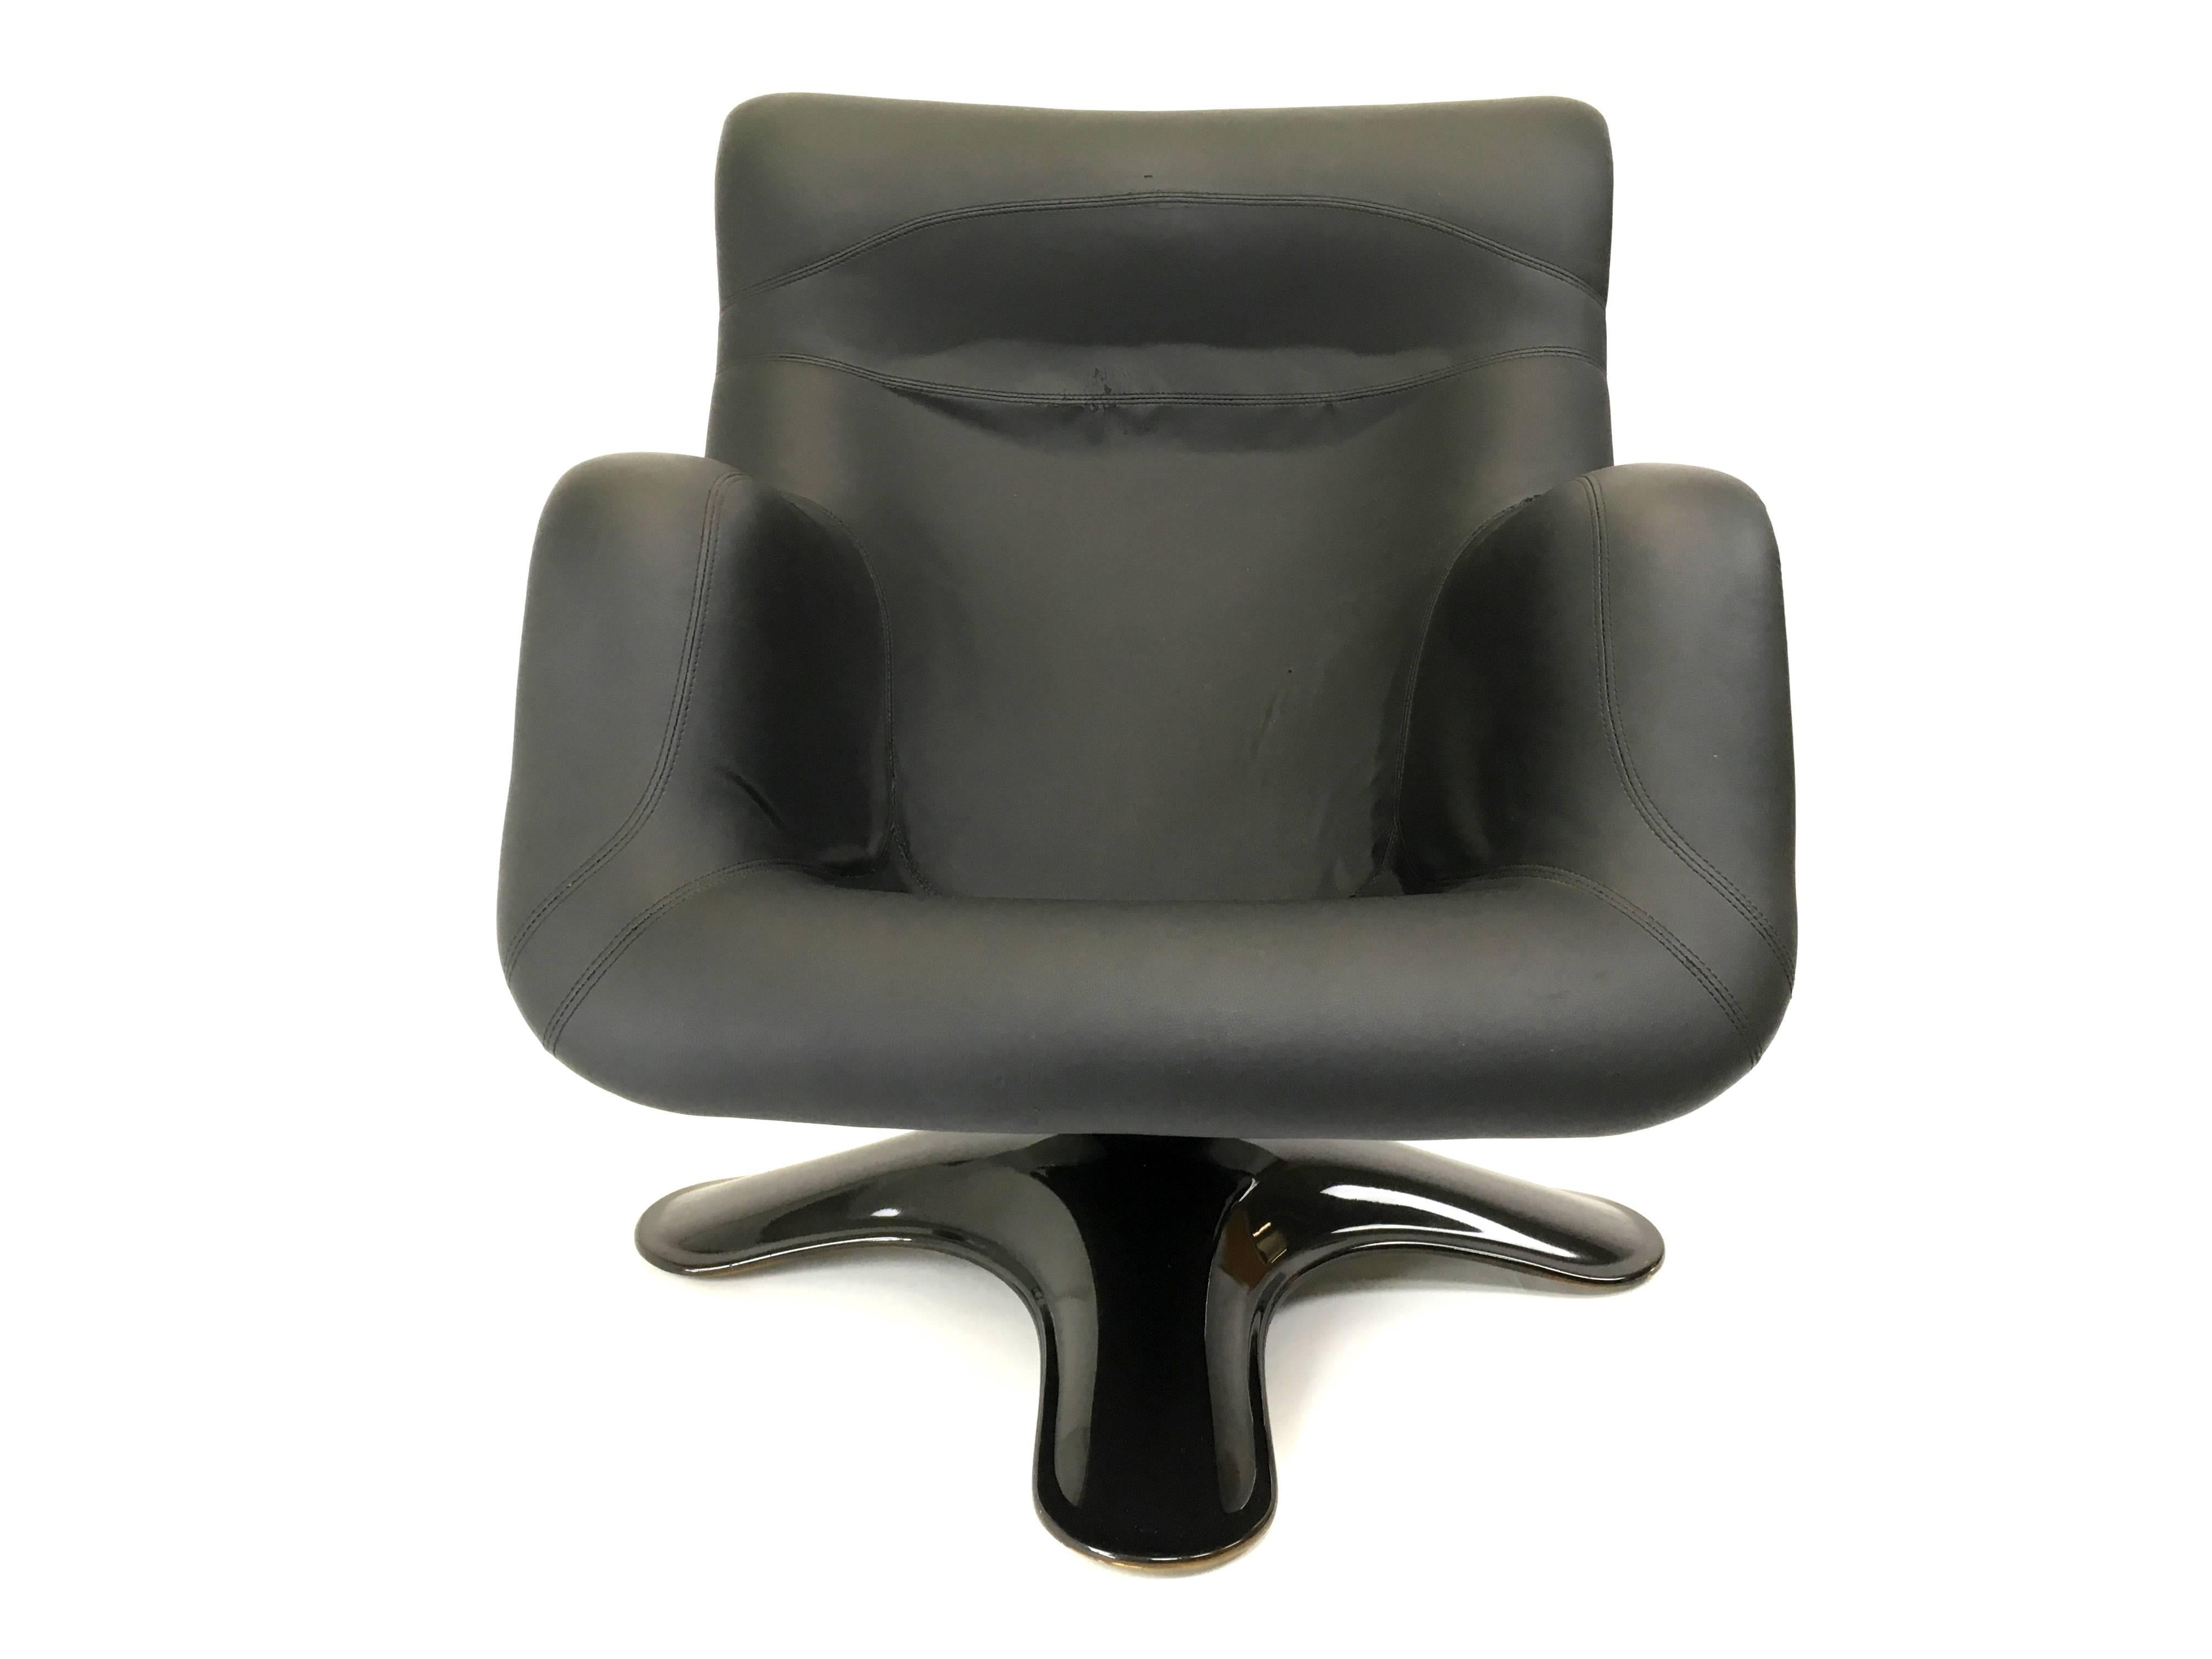 This futuristic swivel lounge chair was designed by Yrjö Kukkapuro for Haimi and was produced in Finland in 1964. The piece features a black fiberglass body and pedestal, and a seat upholstered in black skai.

We ship worldwide, do not hesitate to